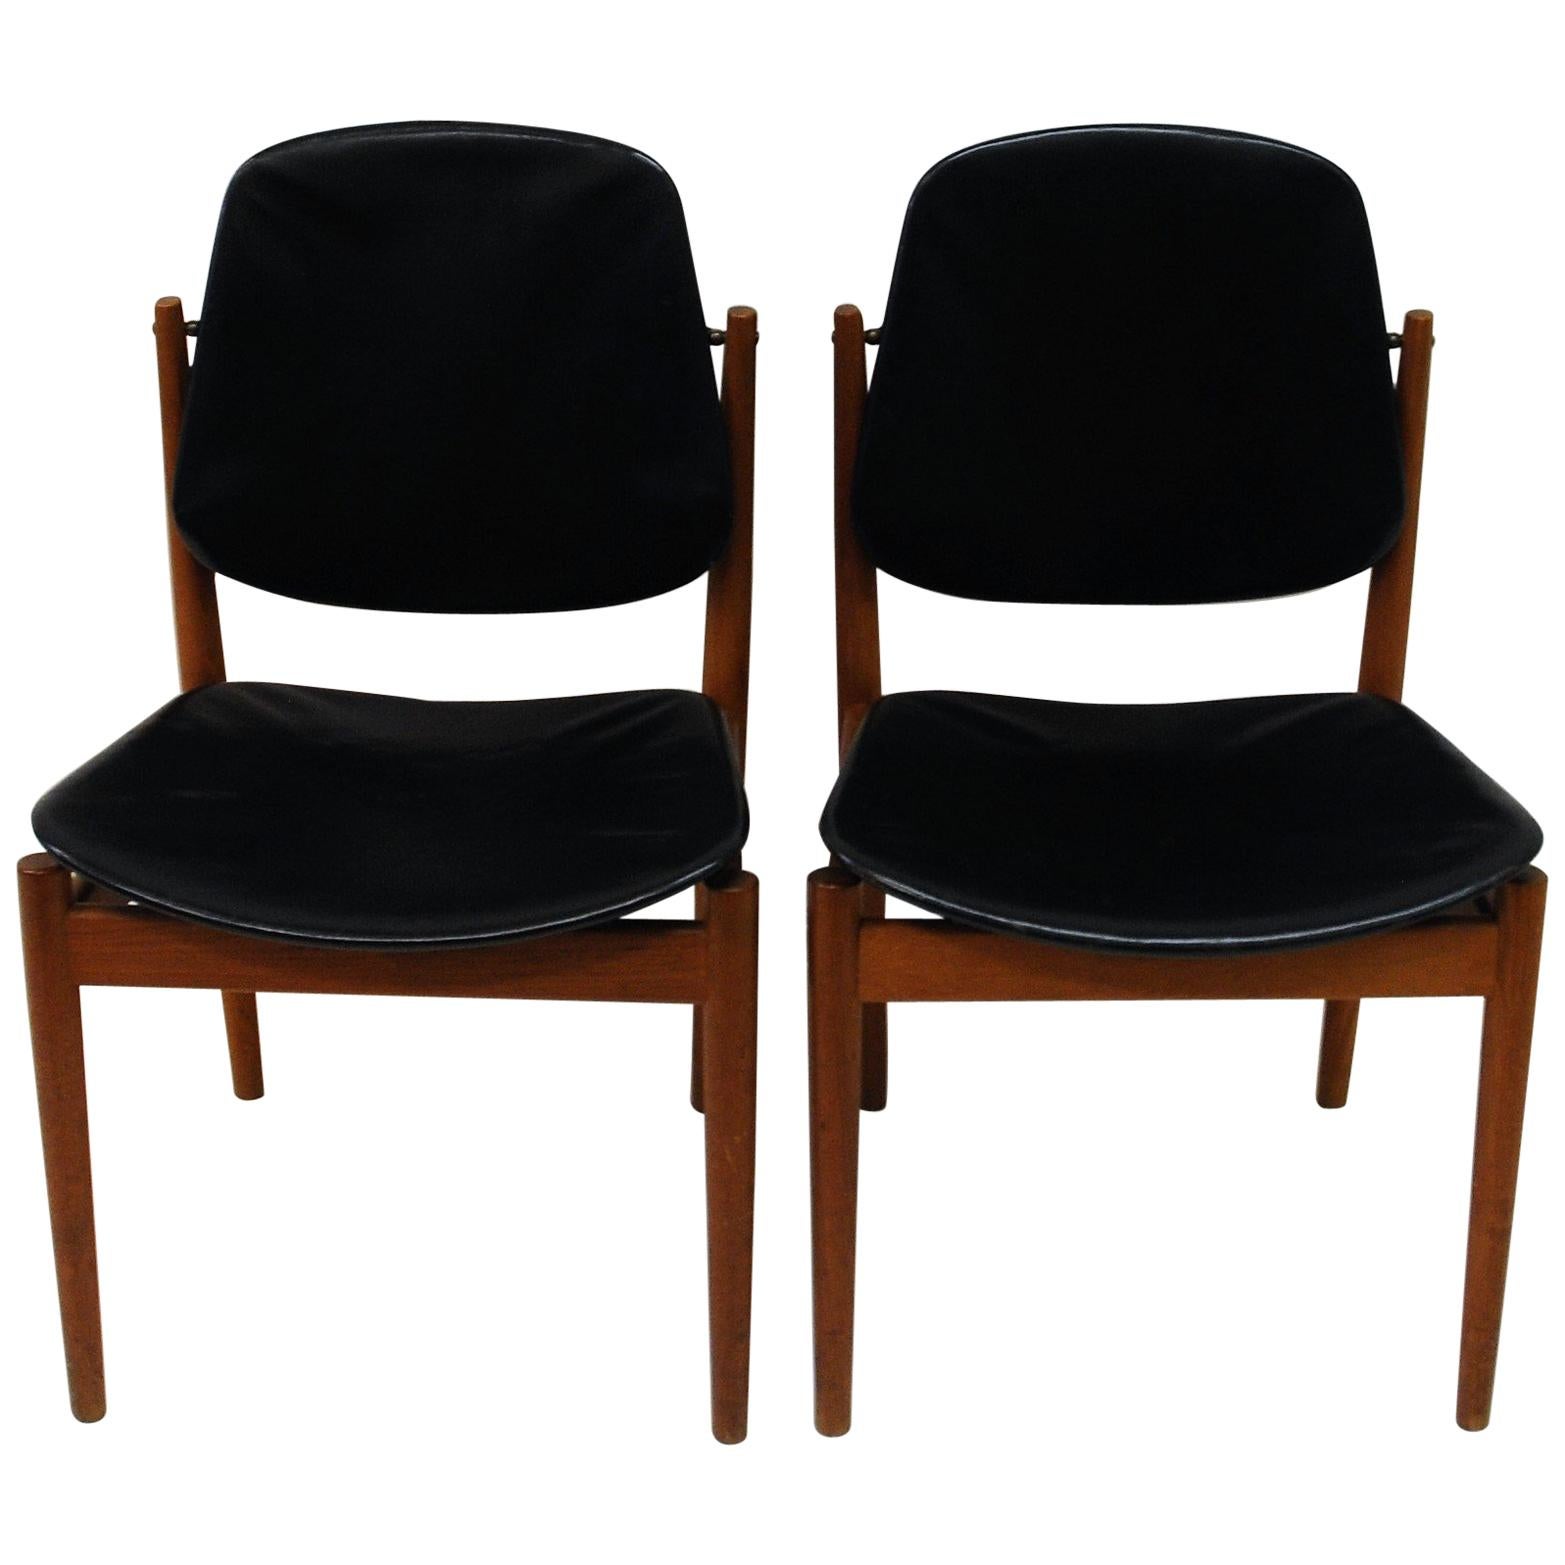 Danish pair of  Diningchairs by Arne Vodder in teak and black leather, 1950s